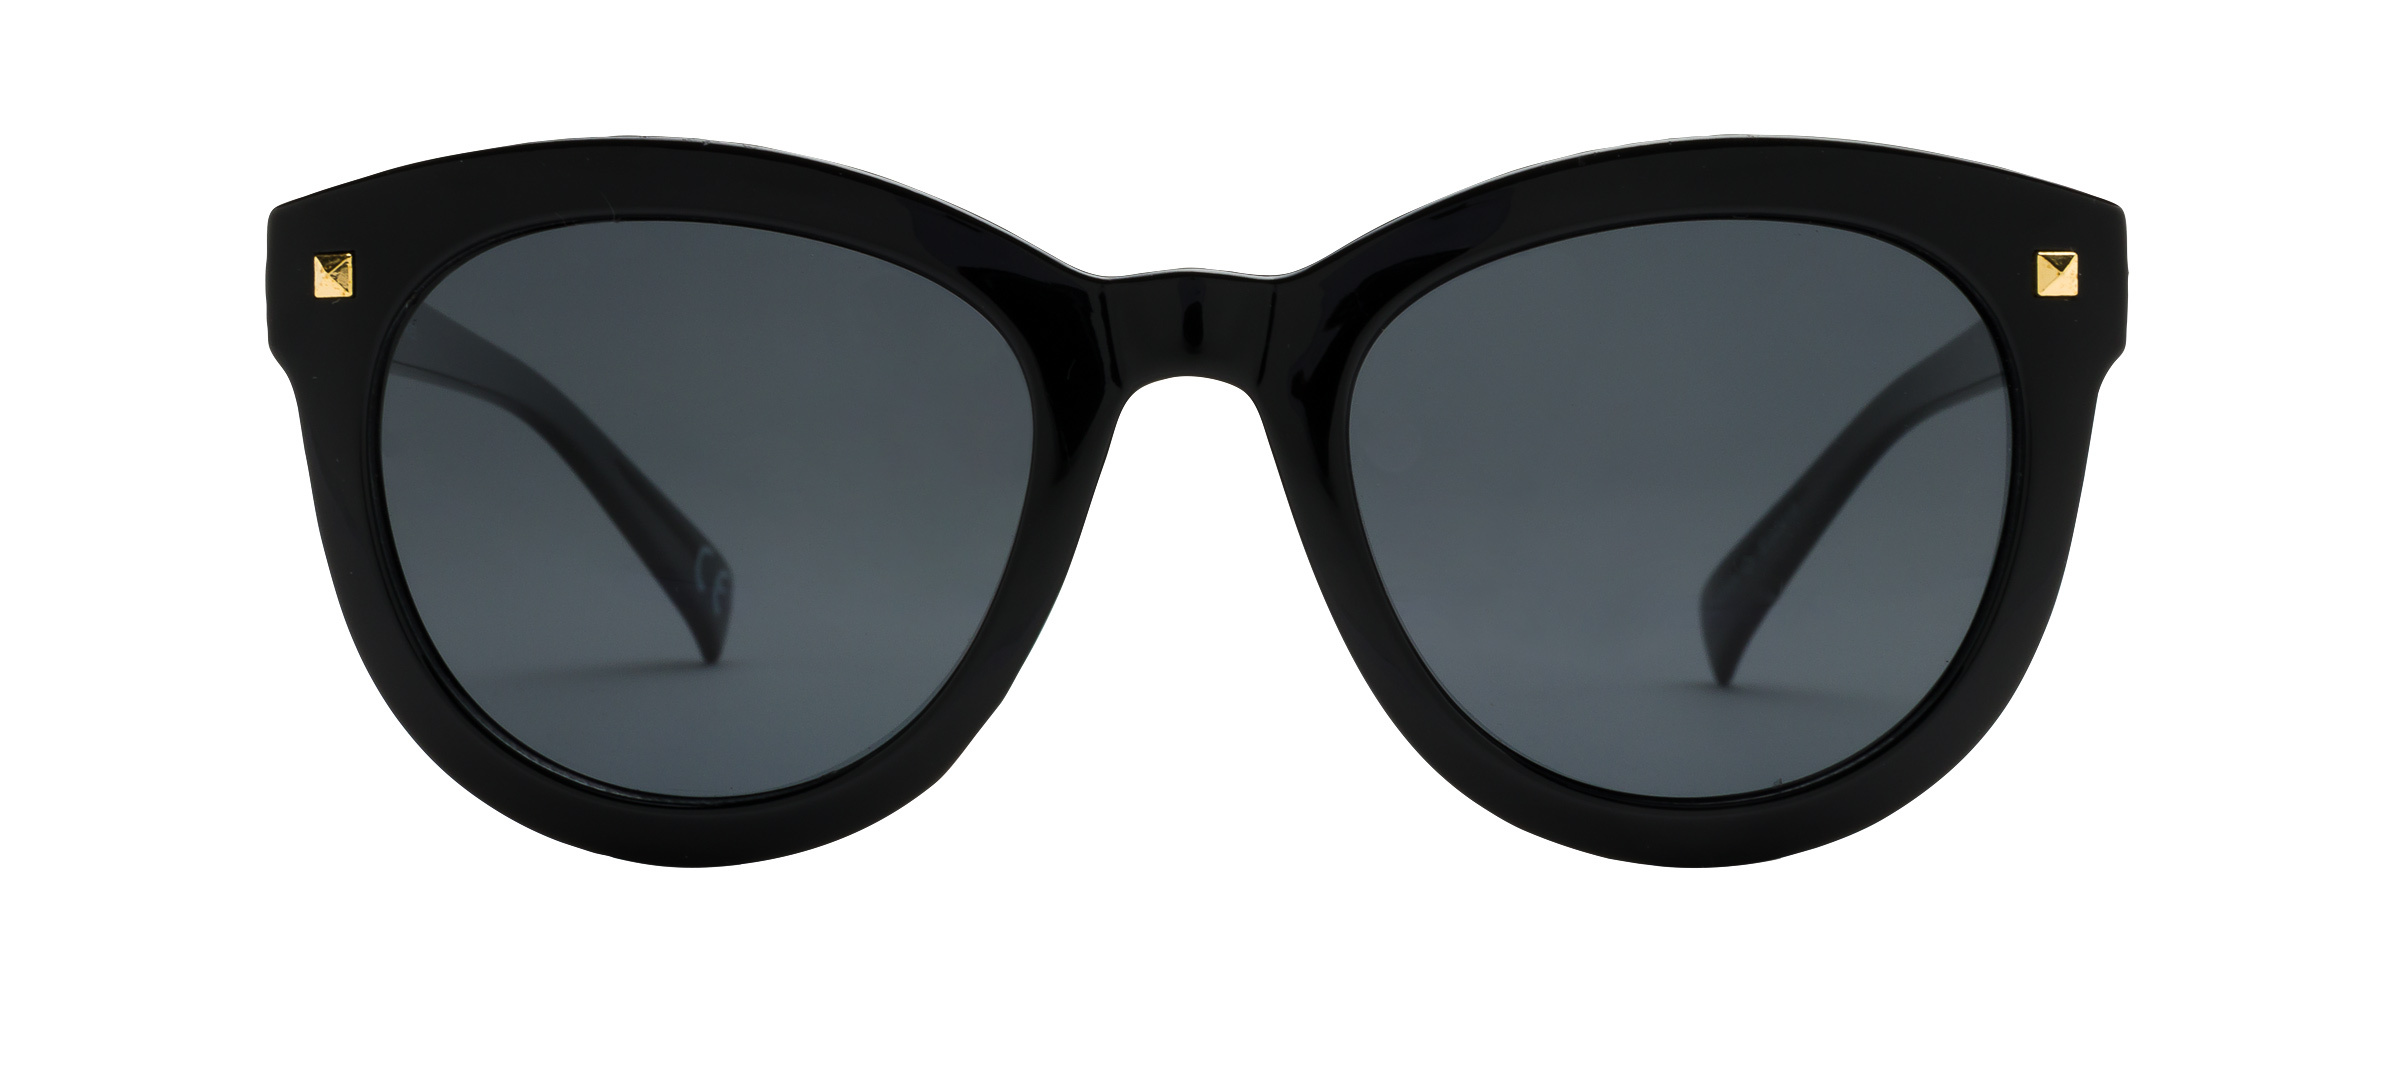 Sunglasses - order online & receive free shipping | Clearly